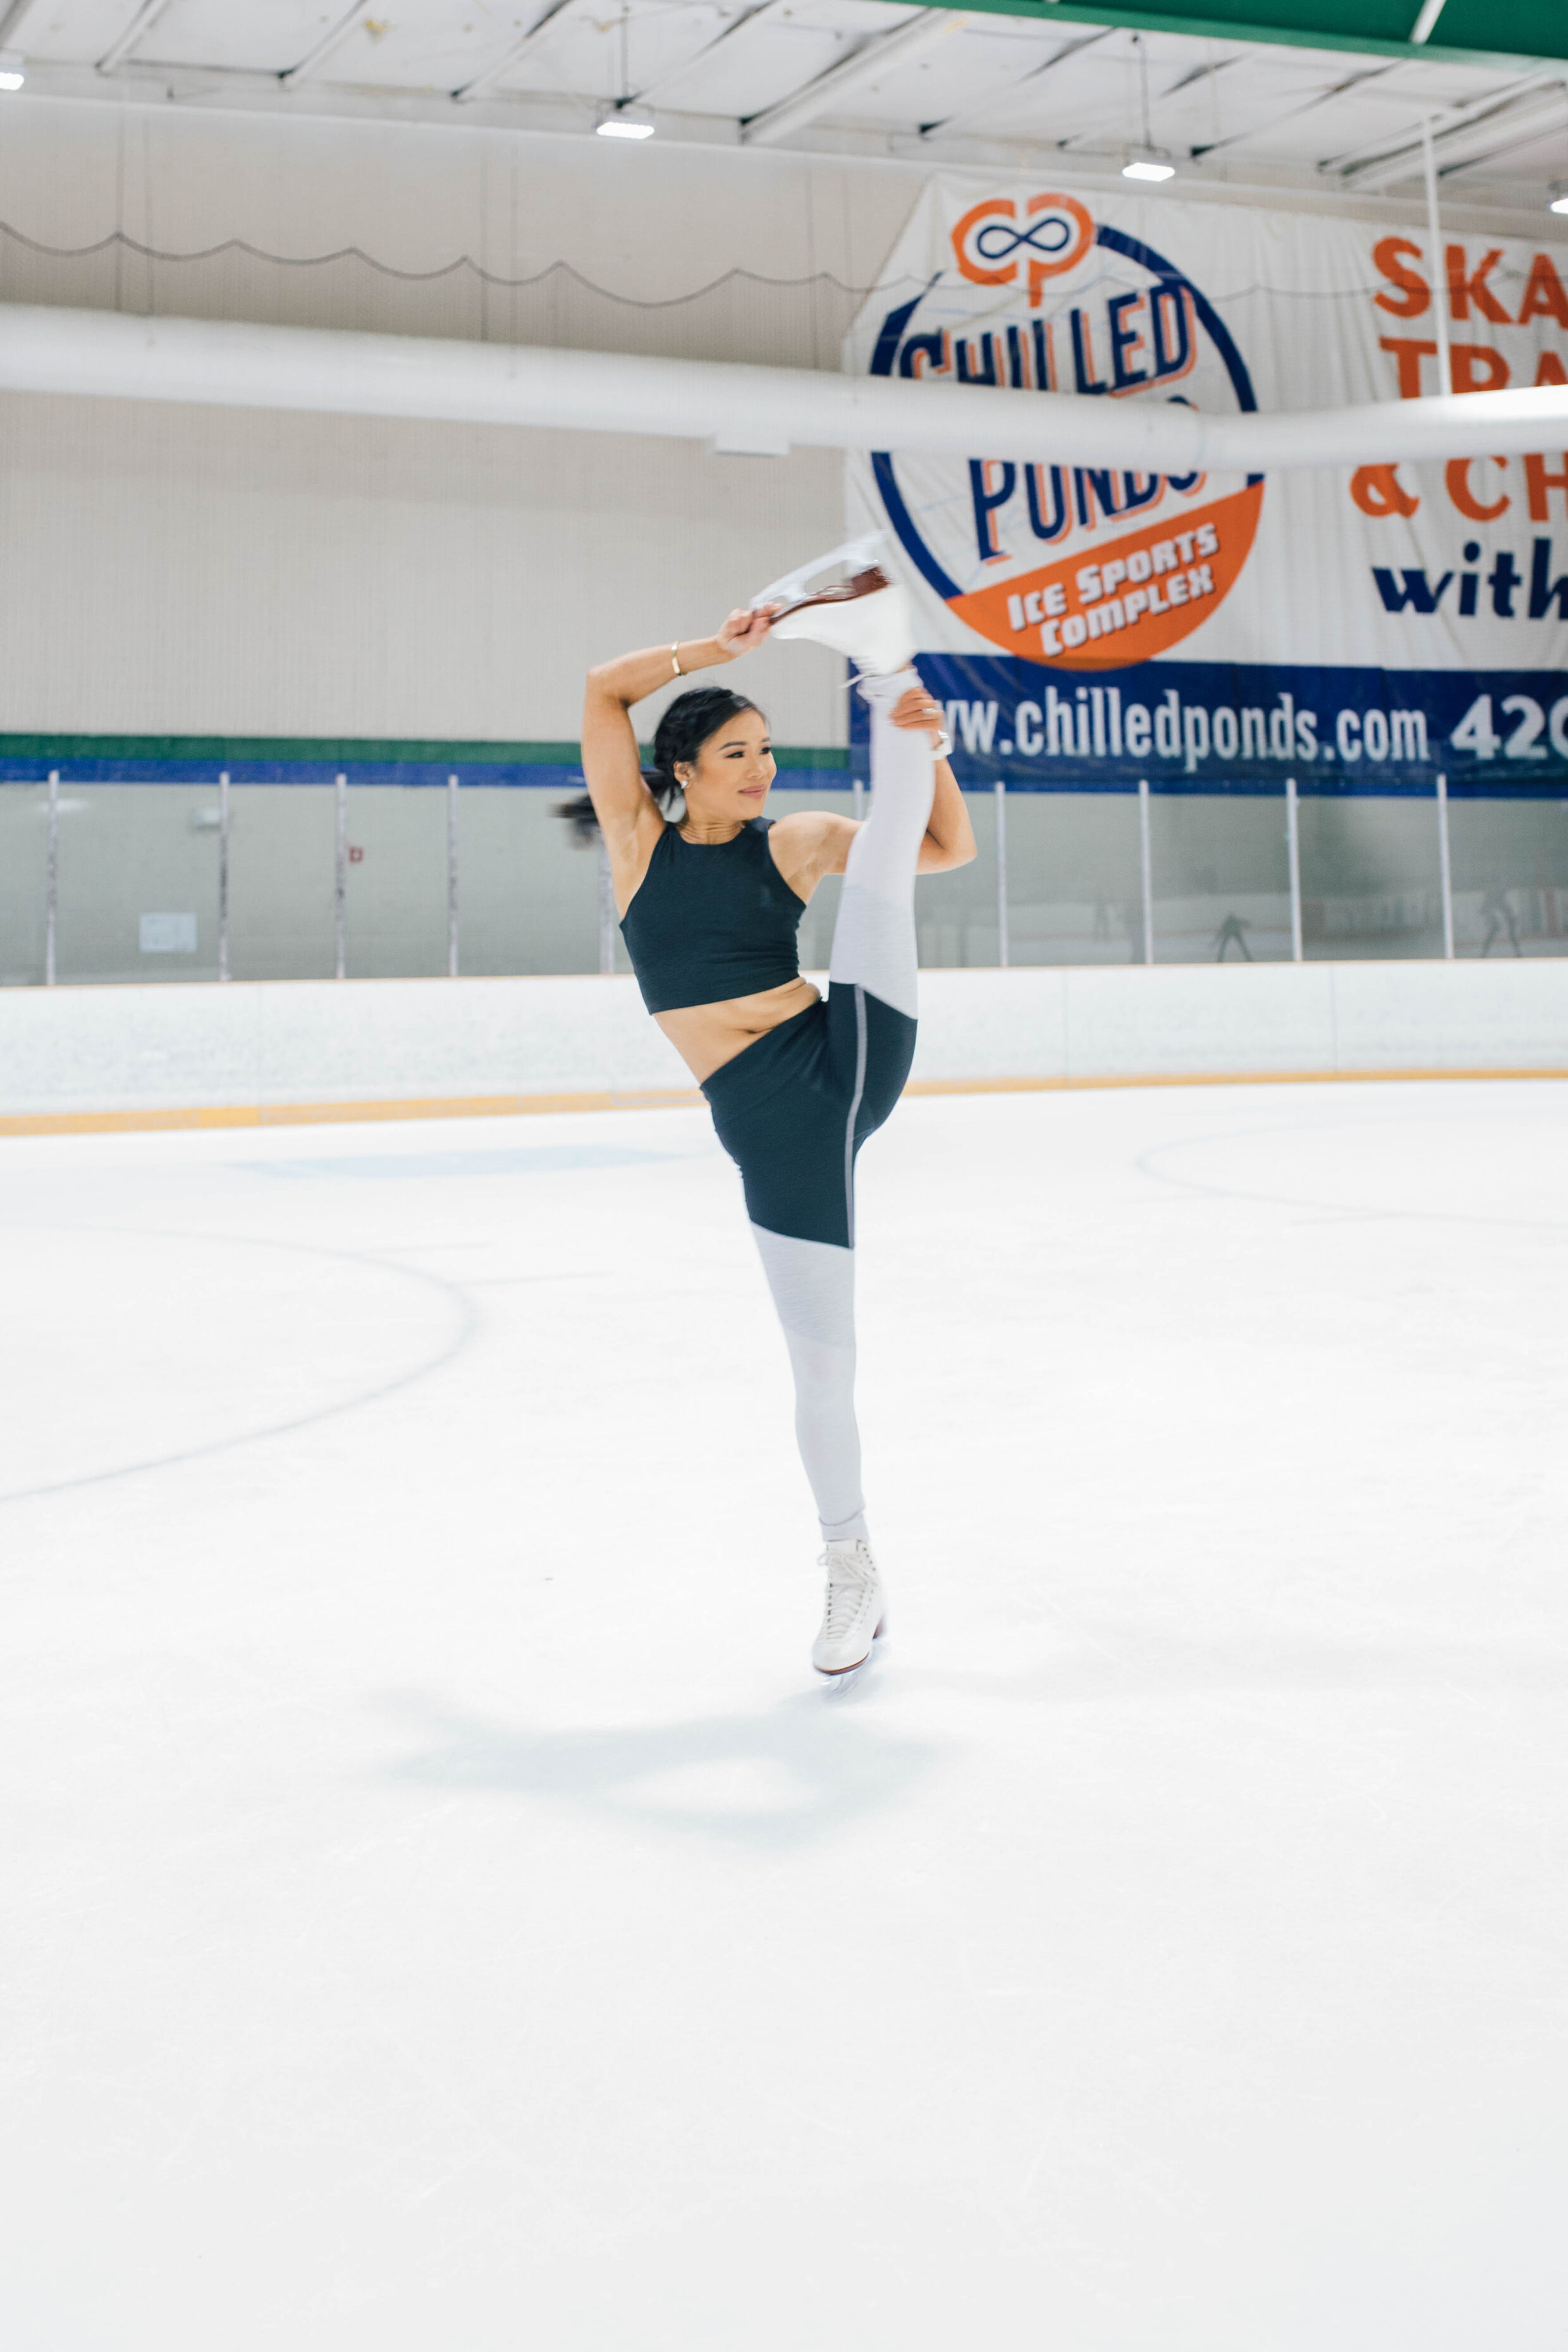 Hoang-Kim goes figure skating wearing Outdoor Voices athletic apparel